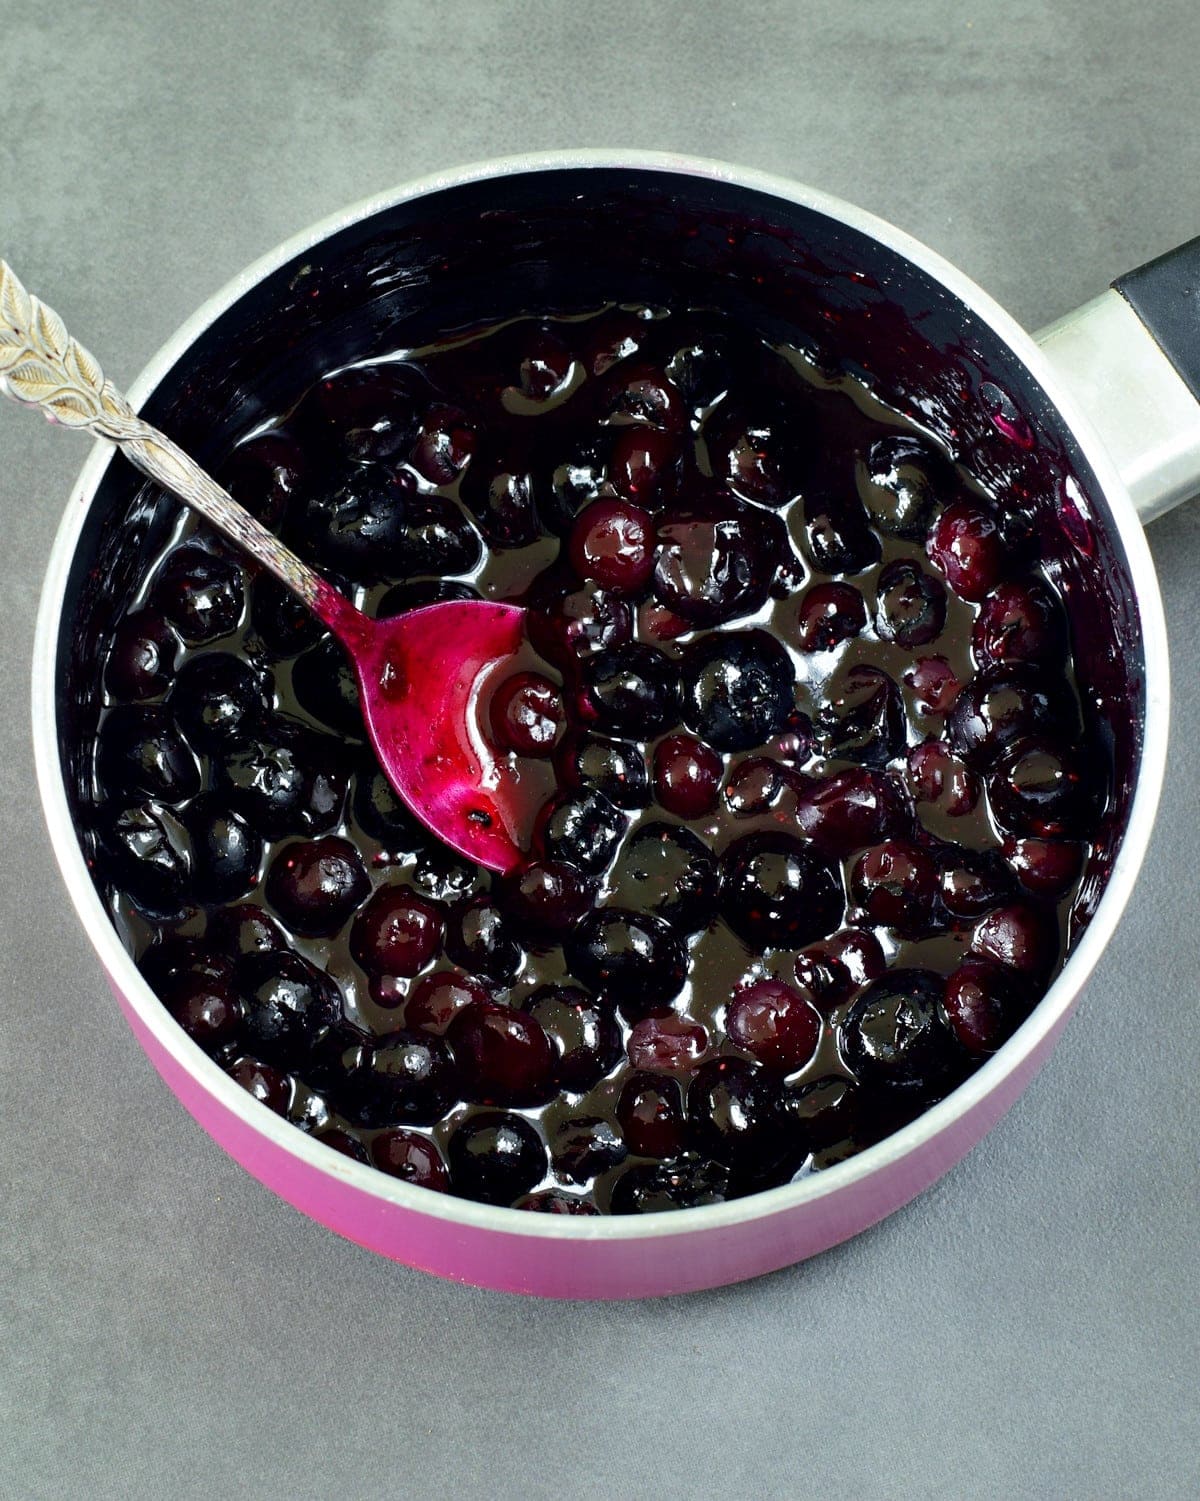 blueberry compote in pink saucepan